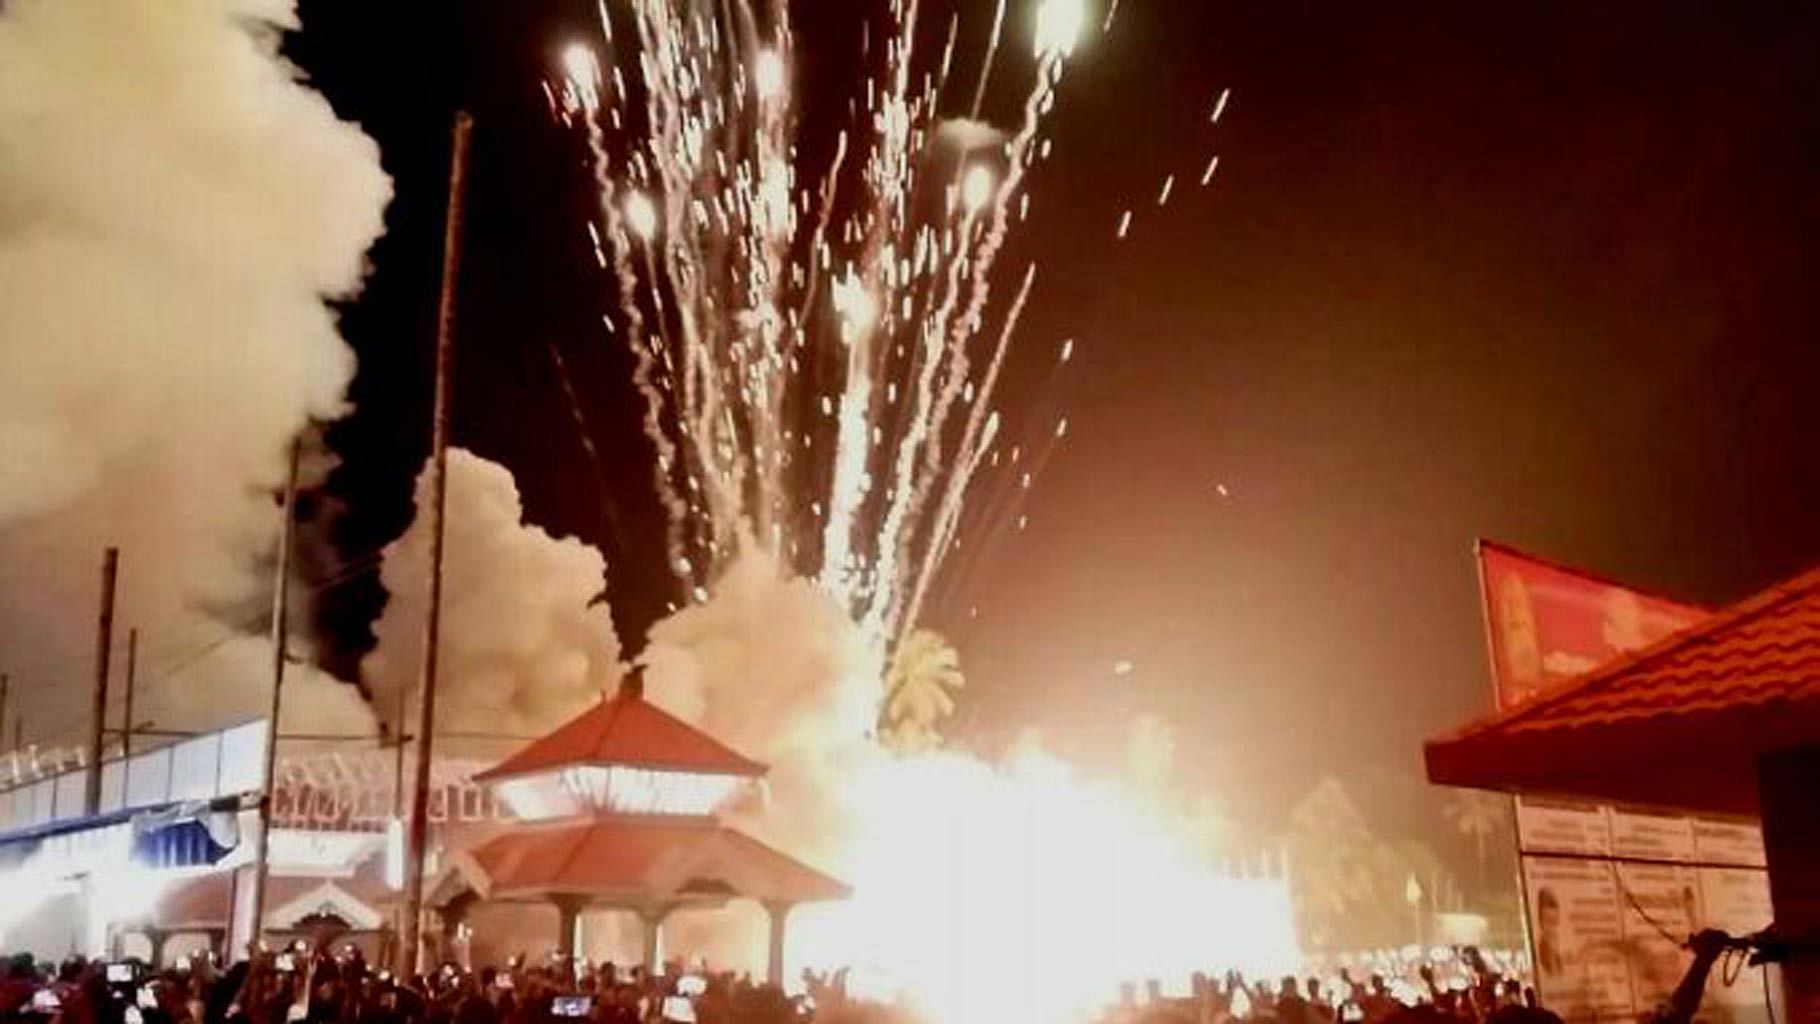 Fireworks on display at the Puttingal temple in Kollam. (Photo: The News Minute)